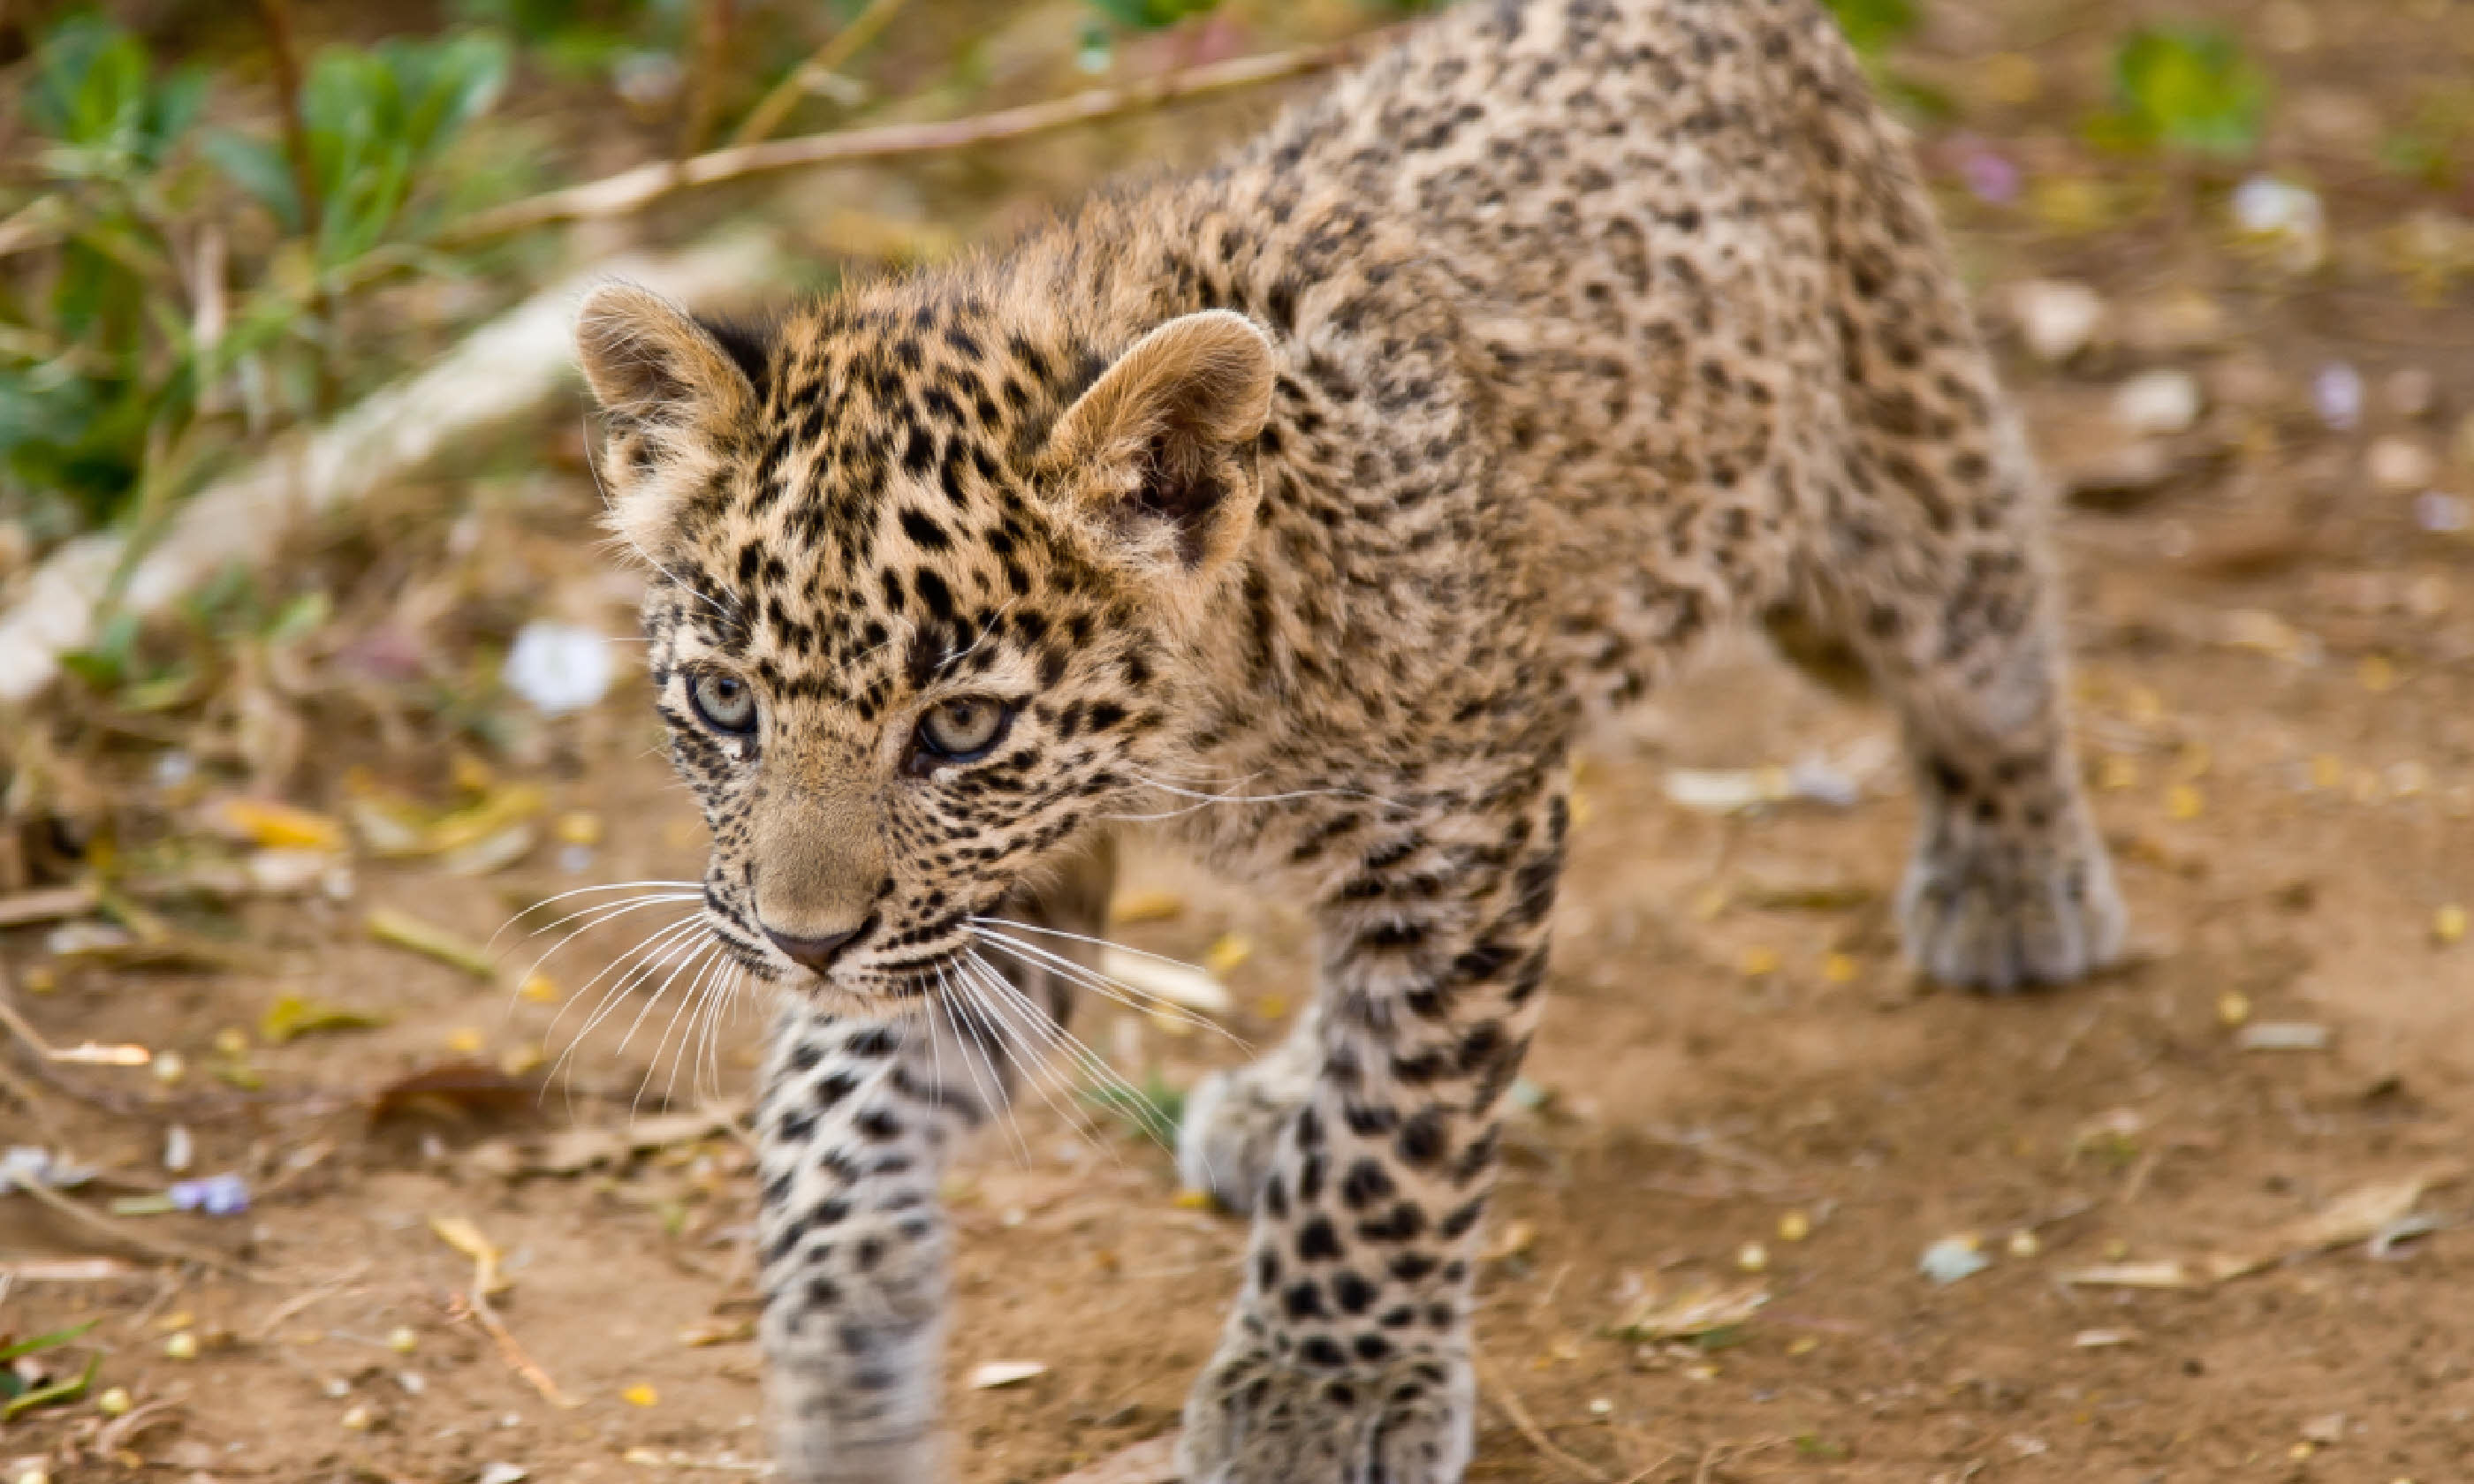 Young leopard cub on the prowl (Shutterstock)